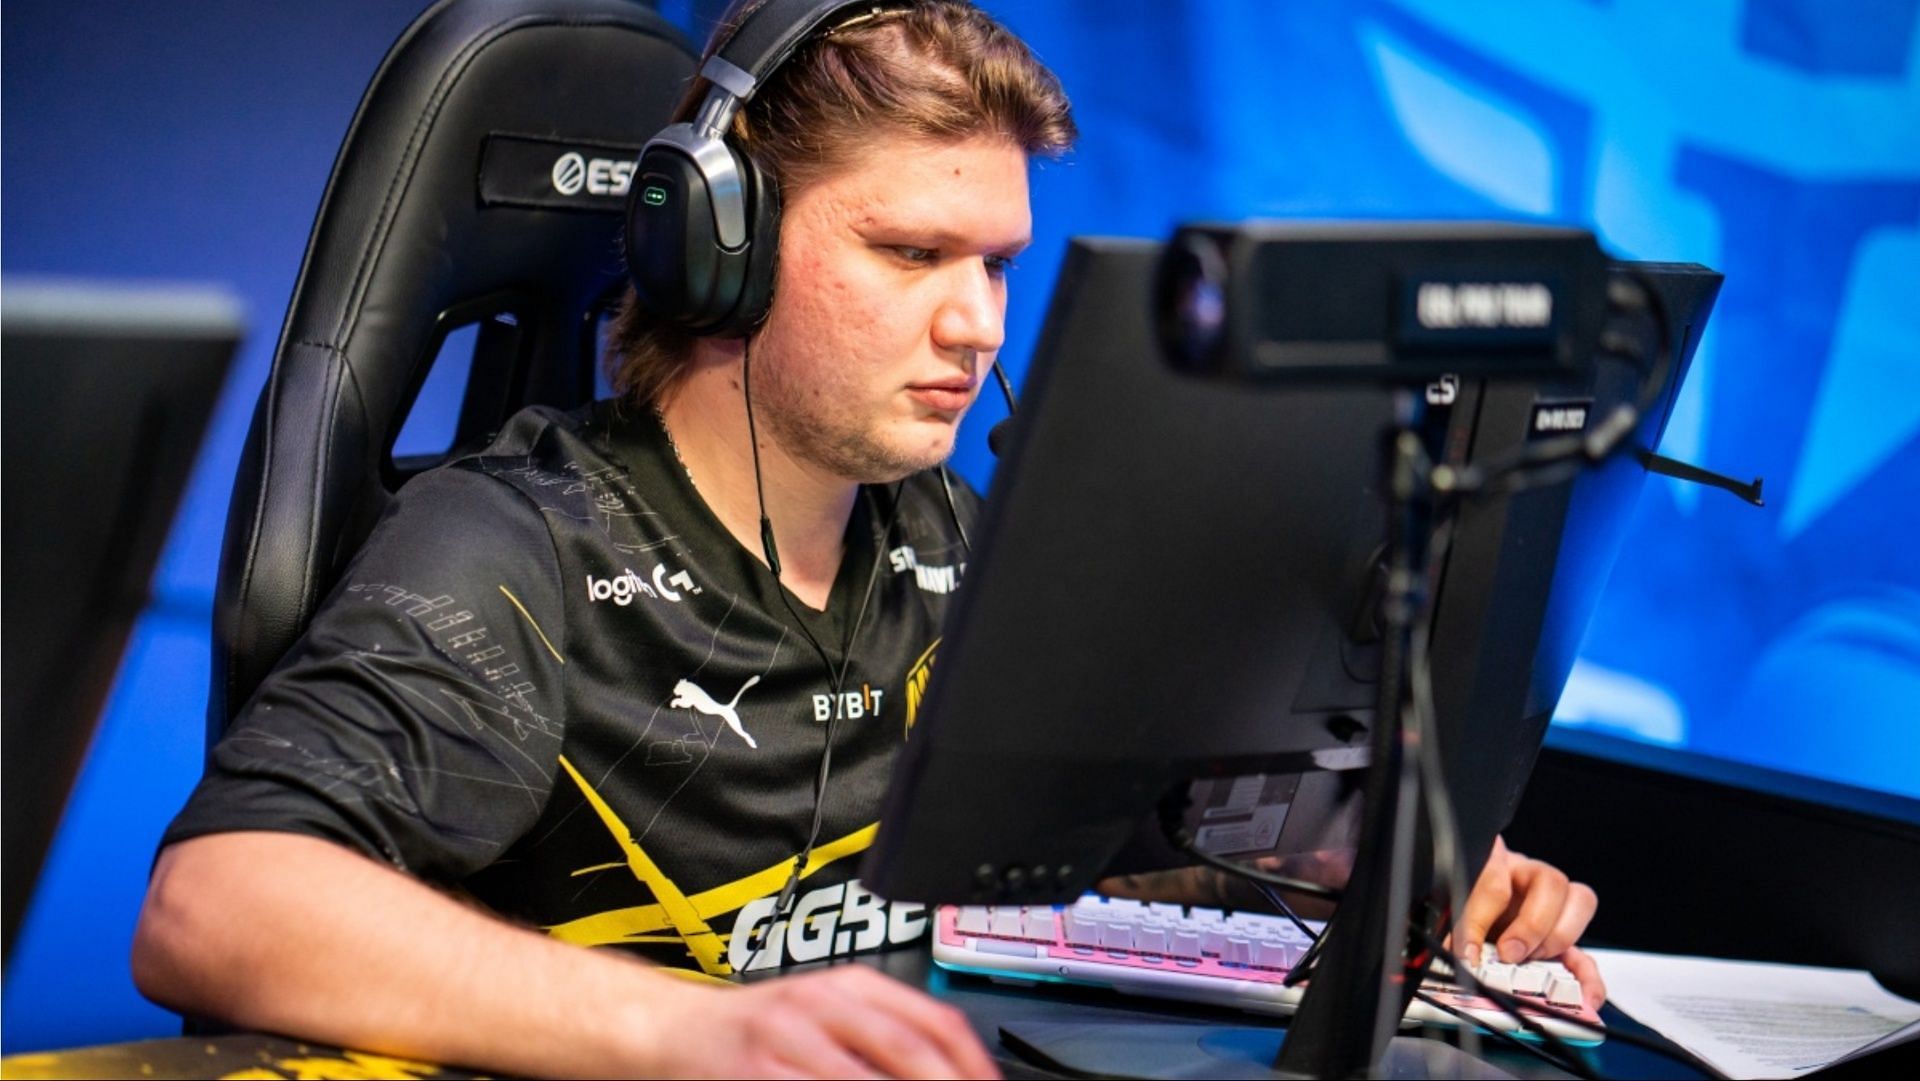 s1mple from Natus Vincere (Image via ESL)